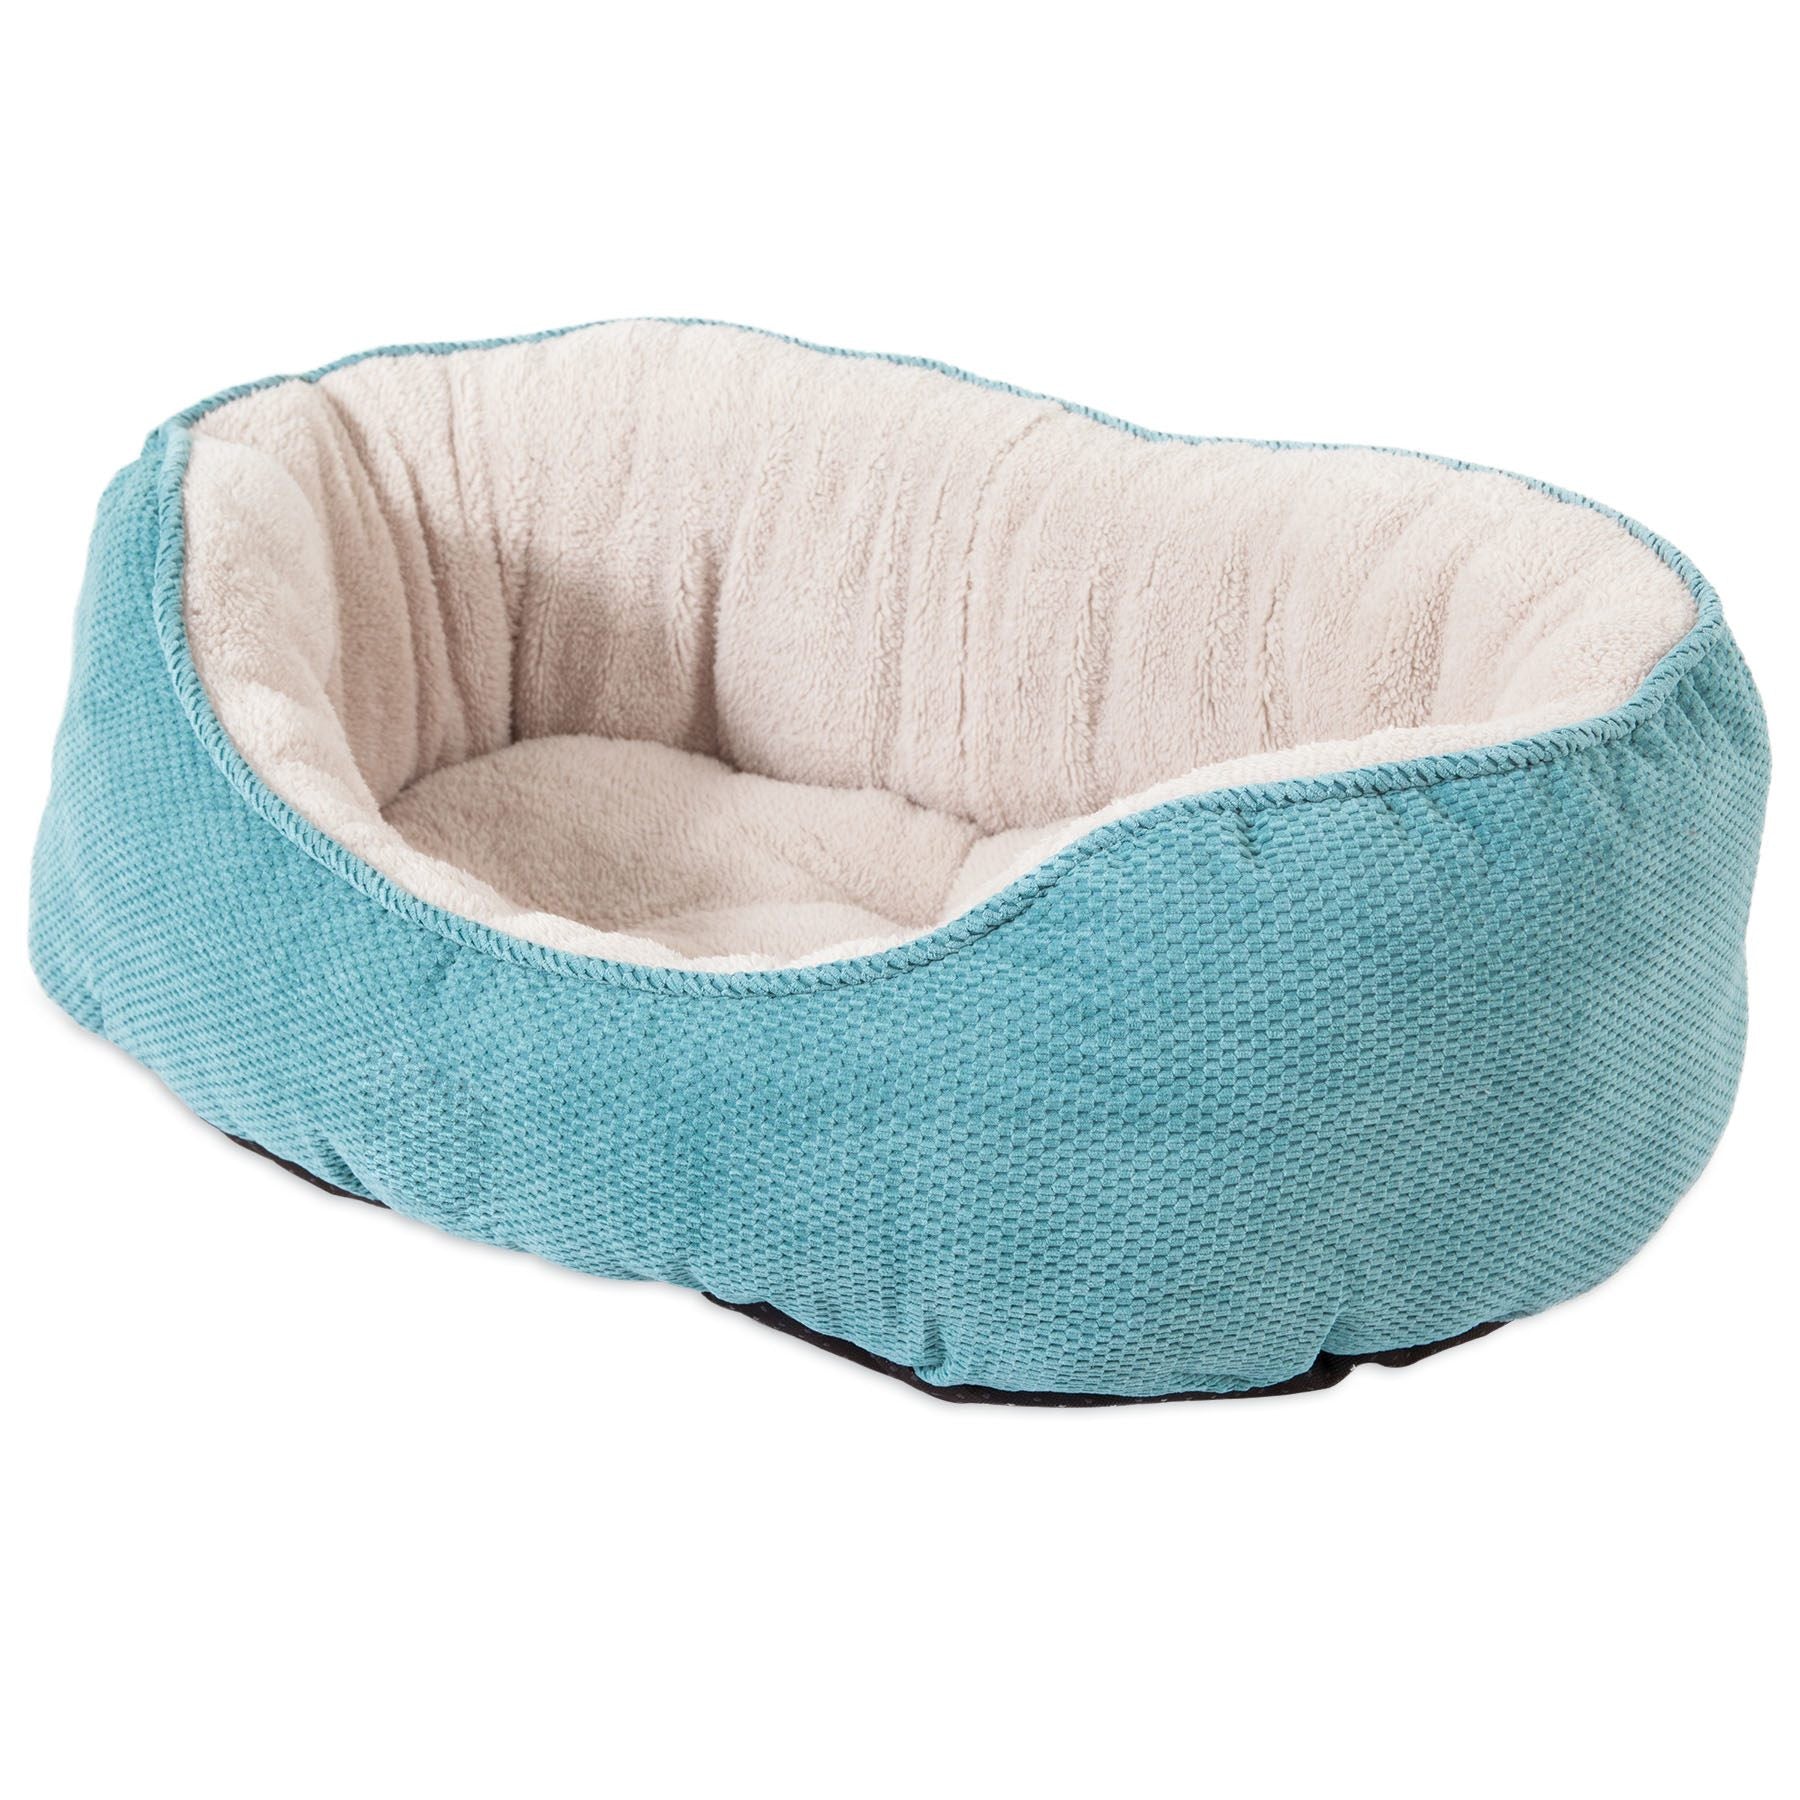 SnooZZy Mod Chic Daydreamer Pet Bed